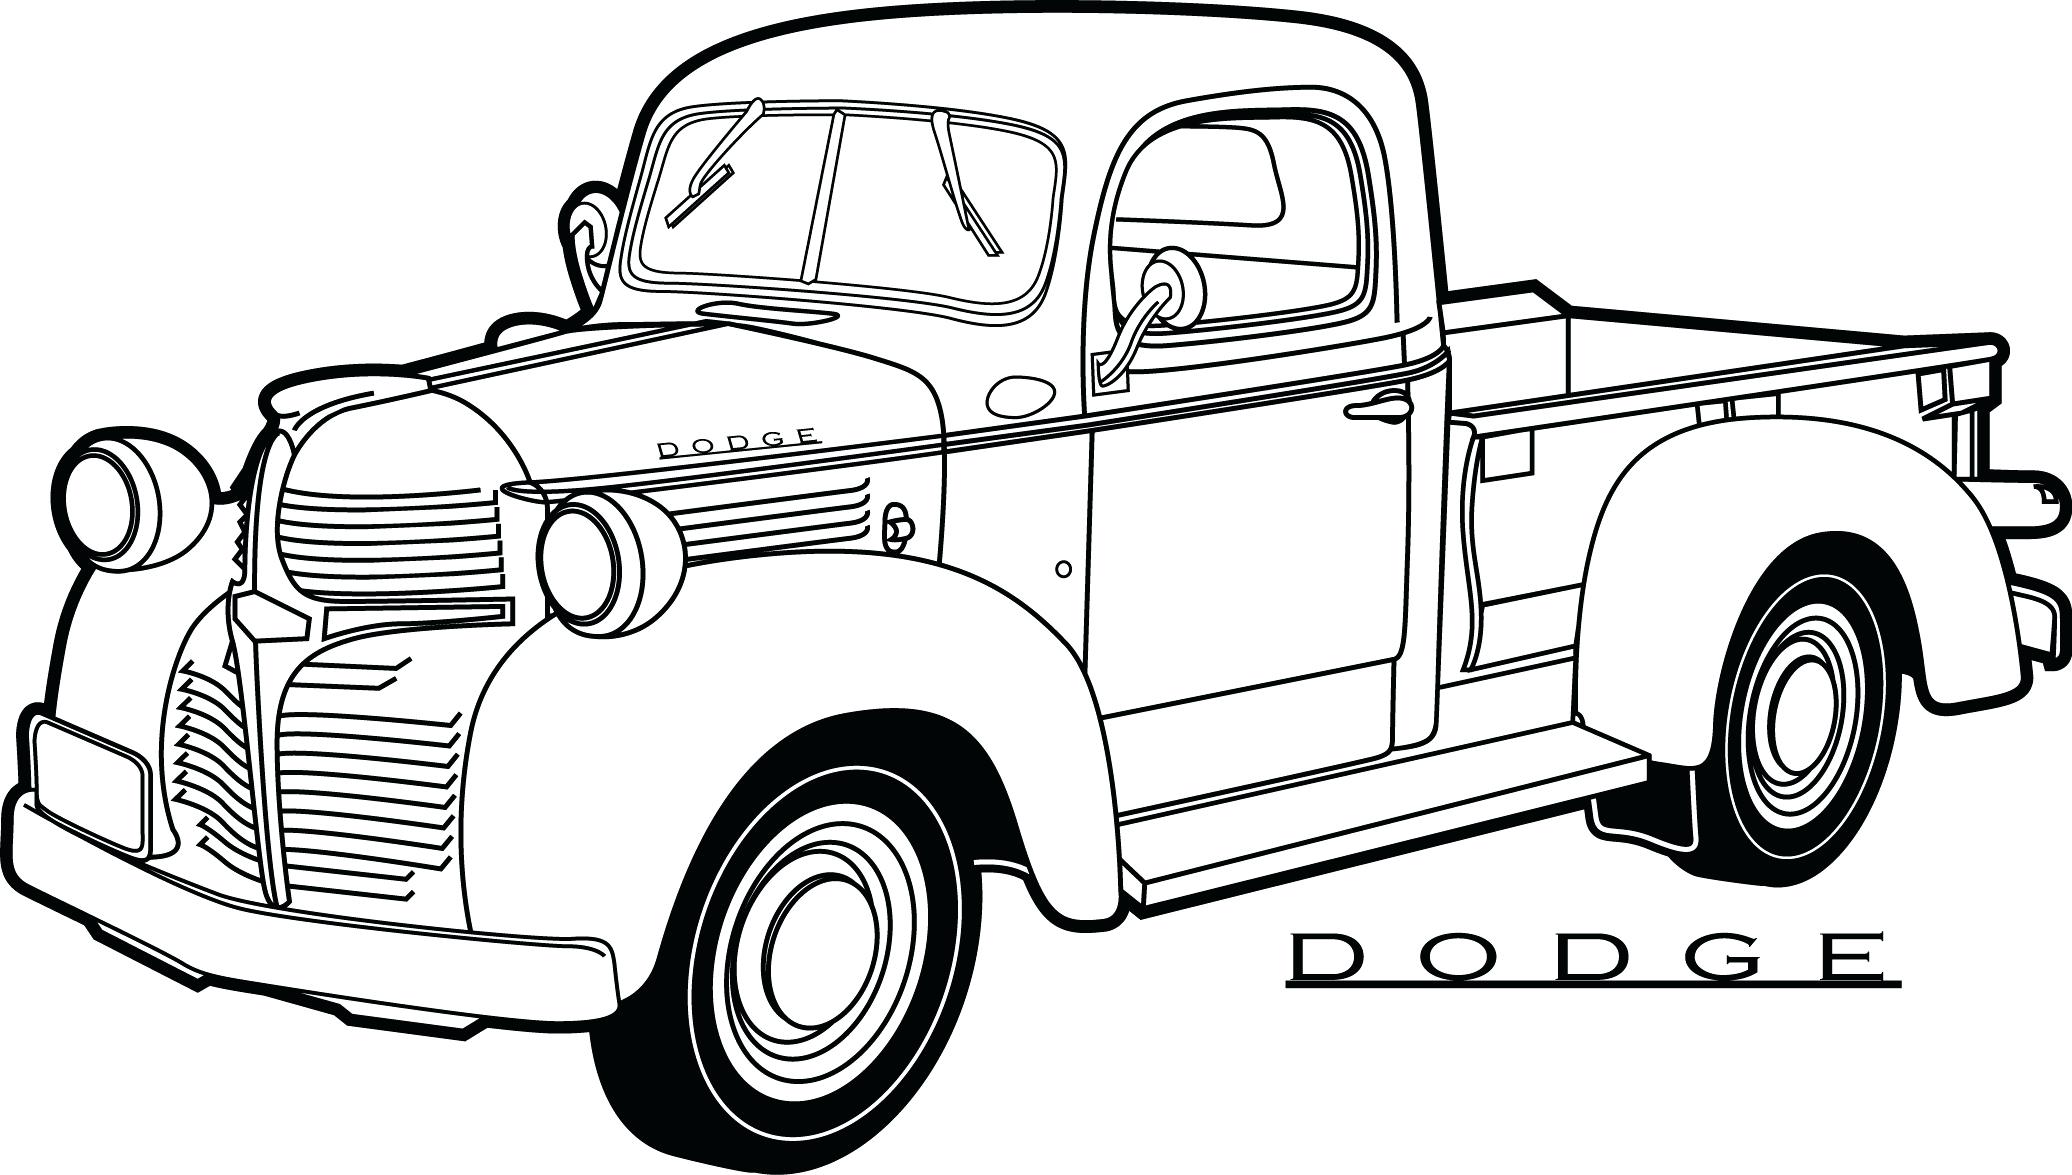 Truck Coloring Pages | Free download on ClipArtMag